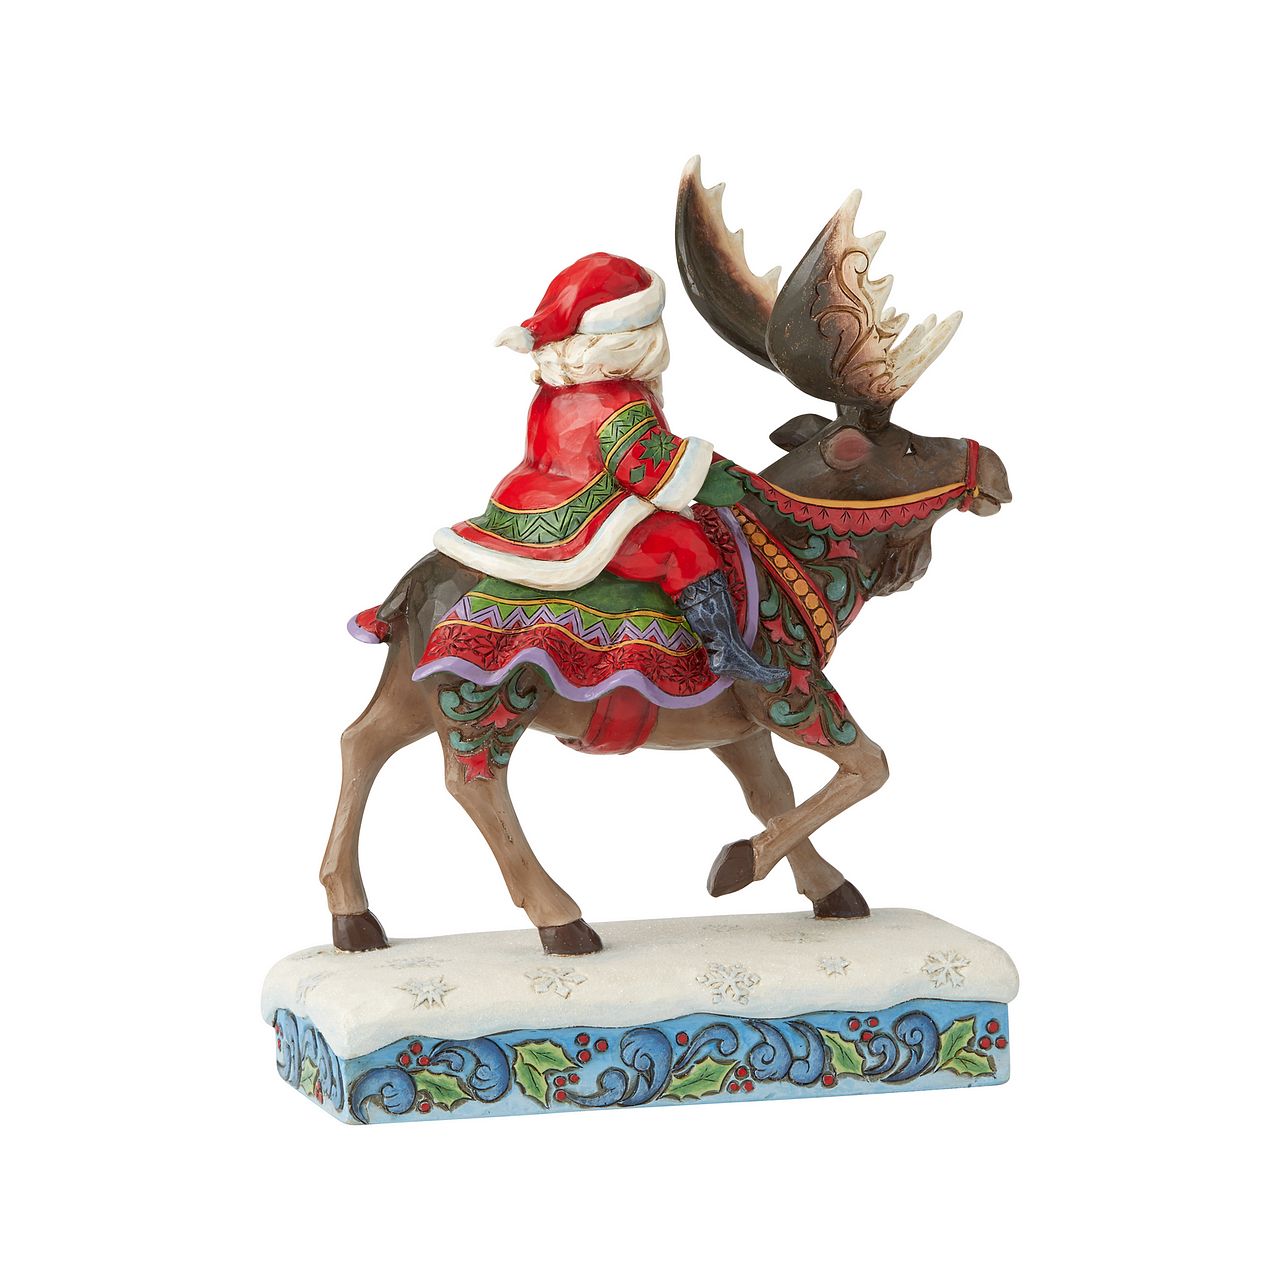 Jim Shore Heartwood Creek Merry Christ-Moose - Santa Riding Moose Figurine  Santa rides through the night on a magnificent Moose in this beautifully handcrafted piece from Jim Shore. This colourful scene of Santa on the move features Jim's signature combination of intricate folk-art design.